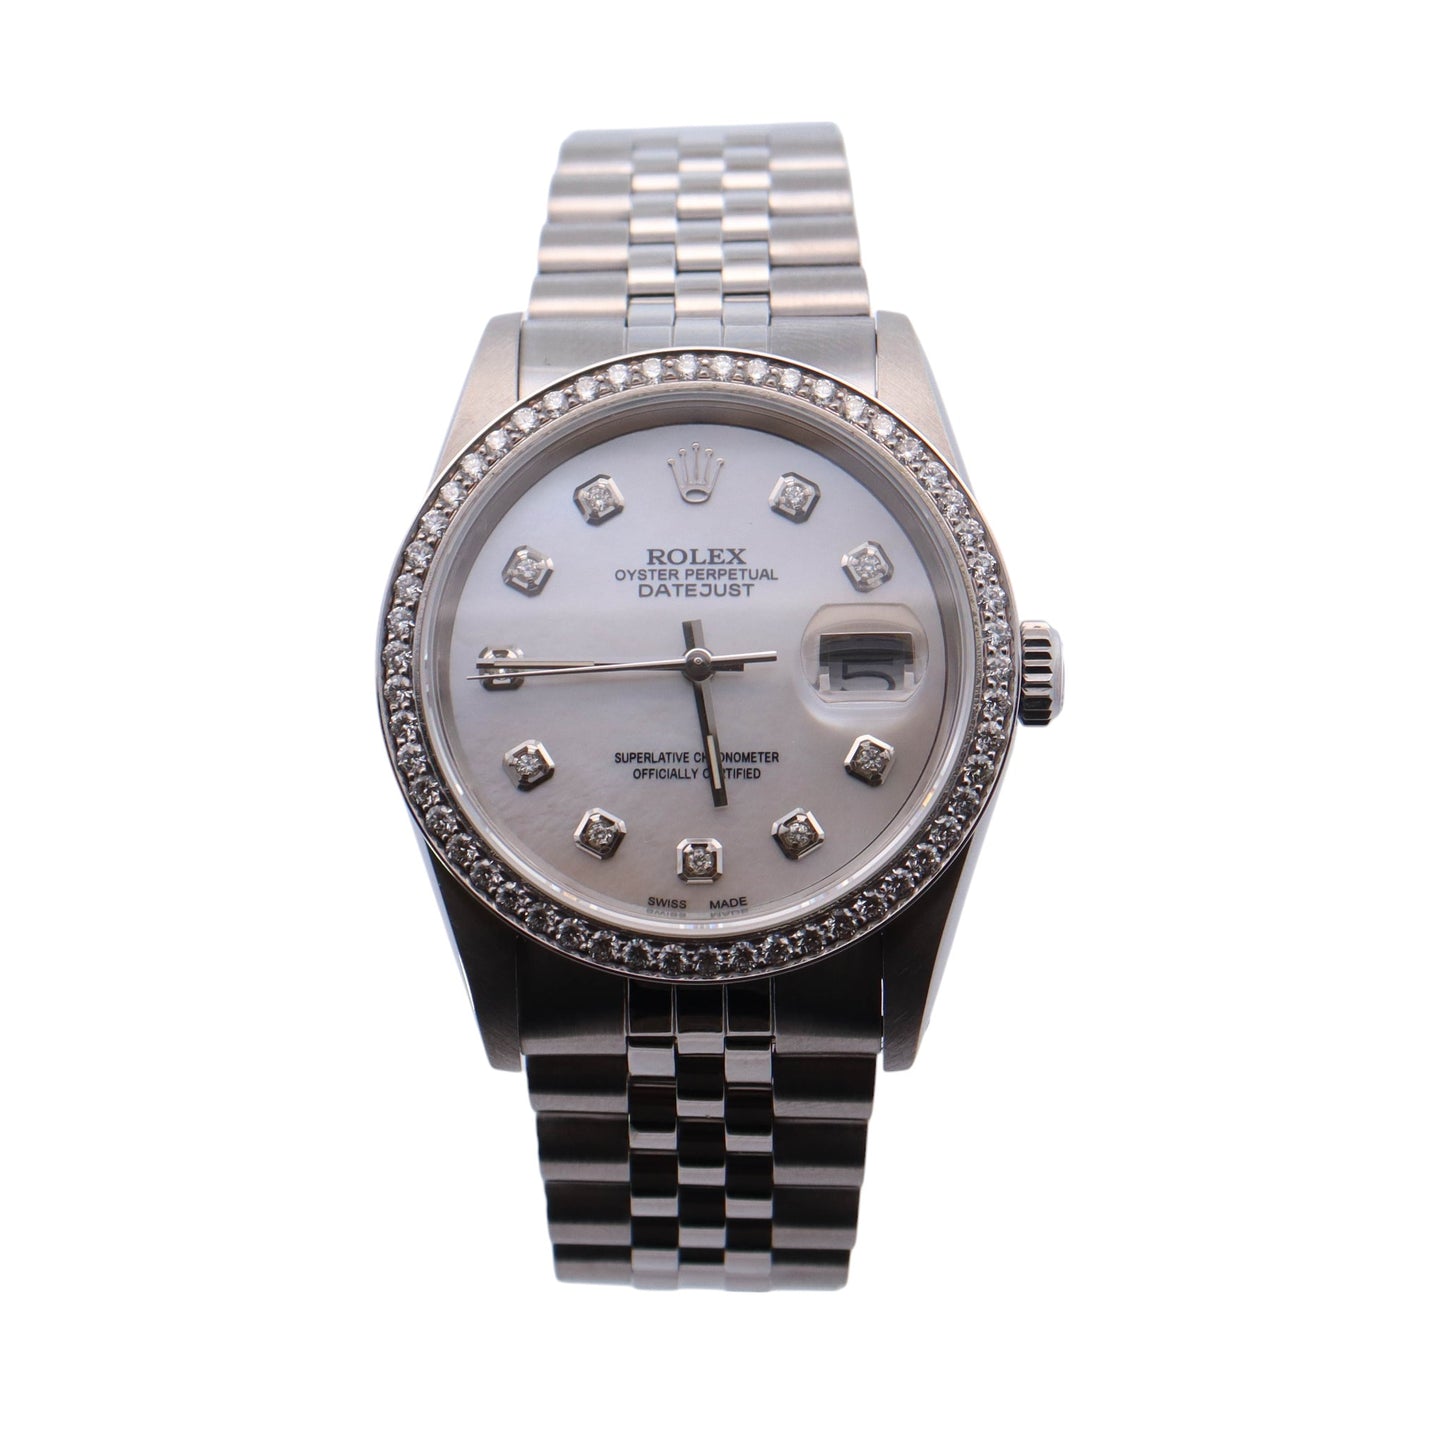 Rolex Datejust Stainless Steel 36mm Silver Stick Dial Watch Reference #: 16234